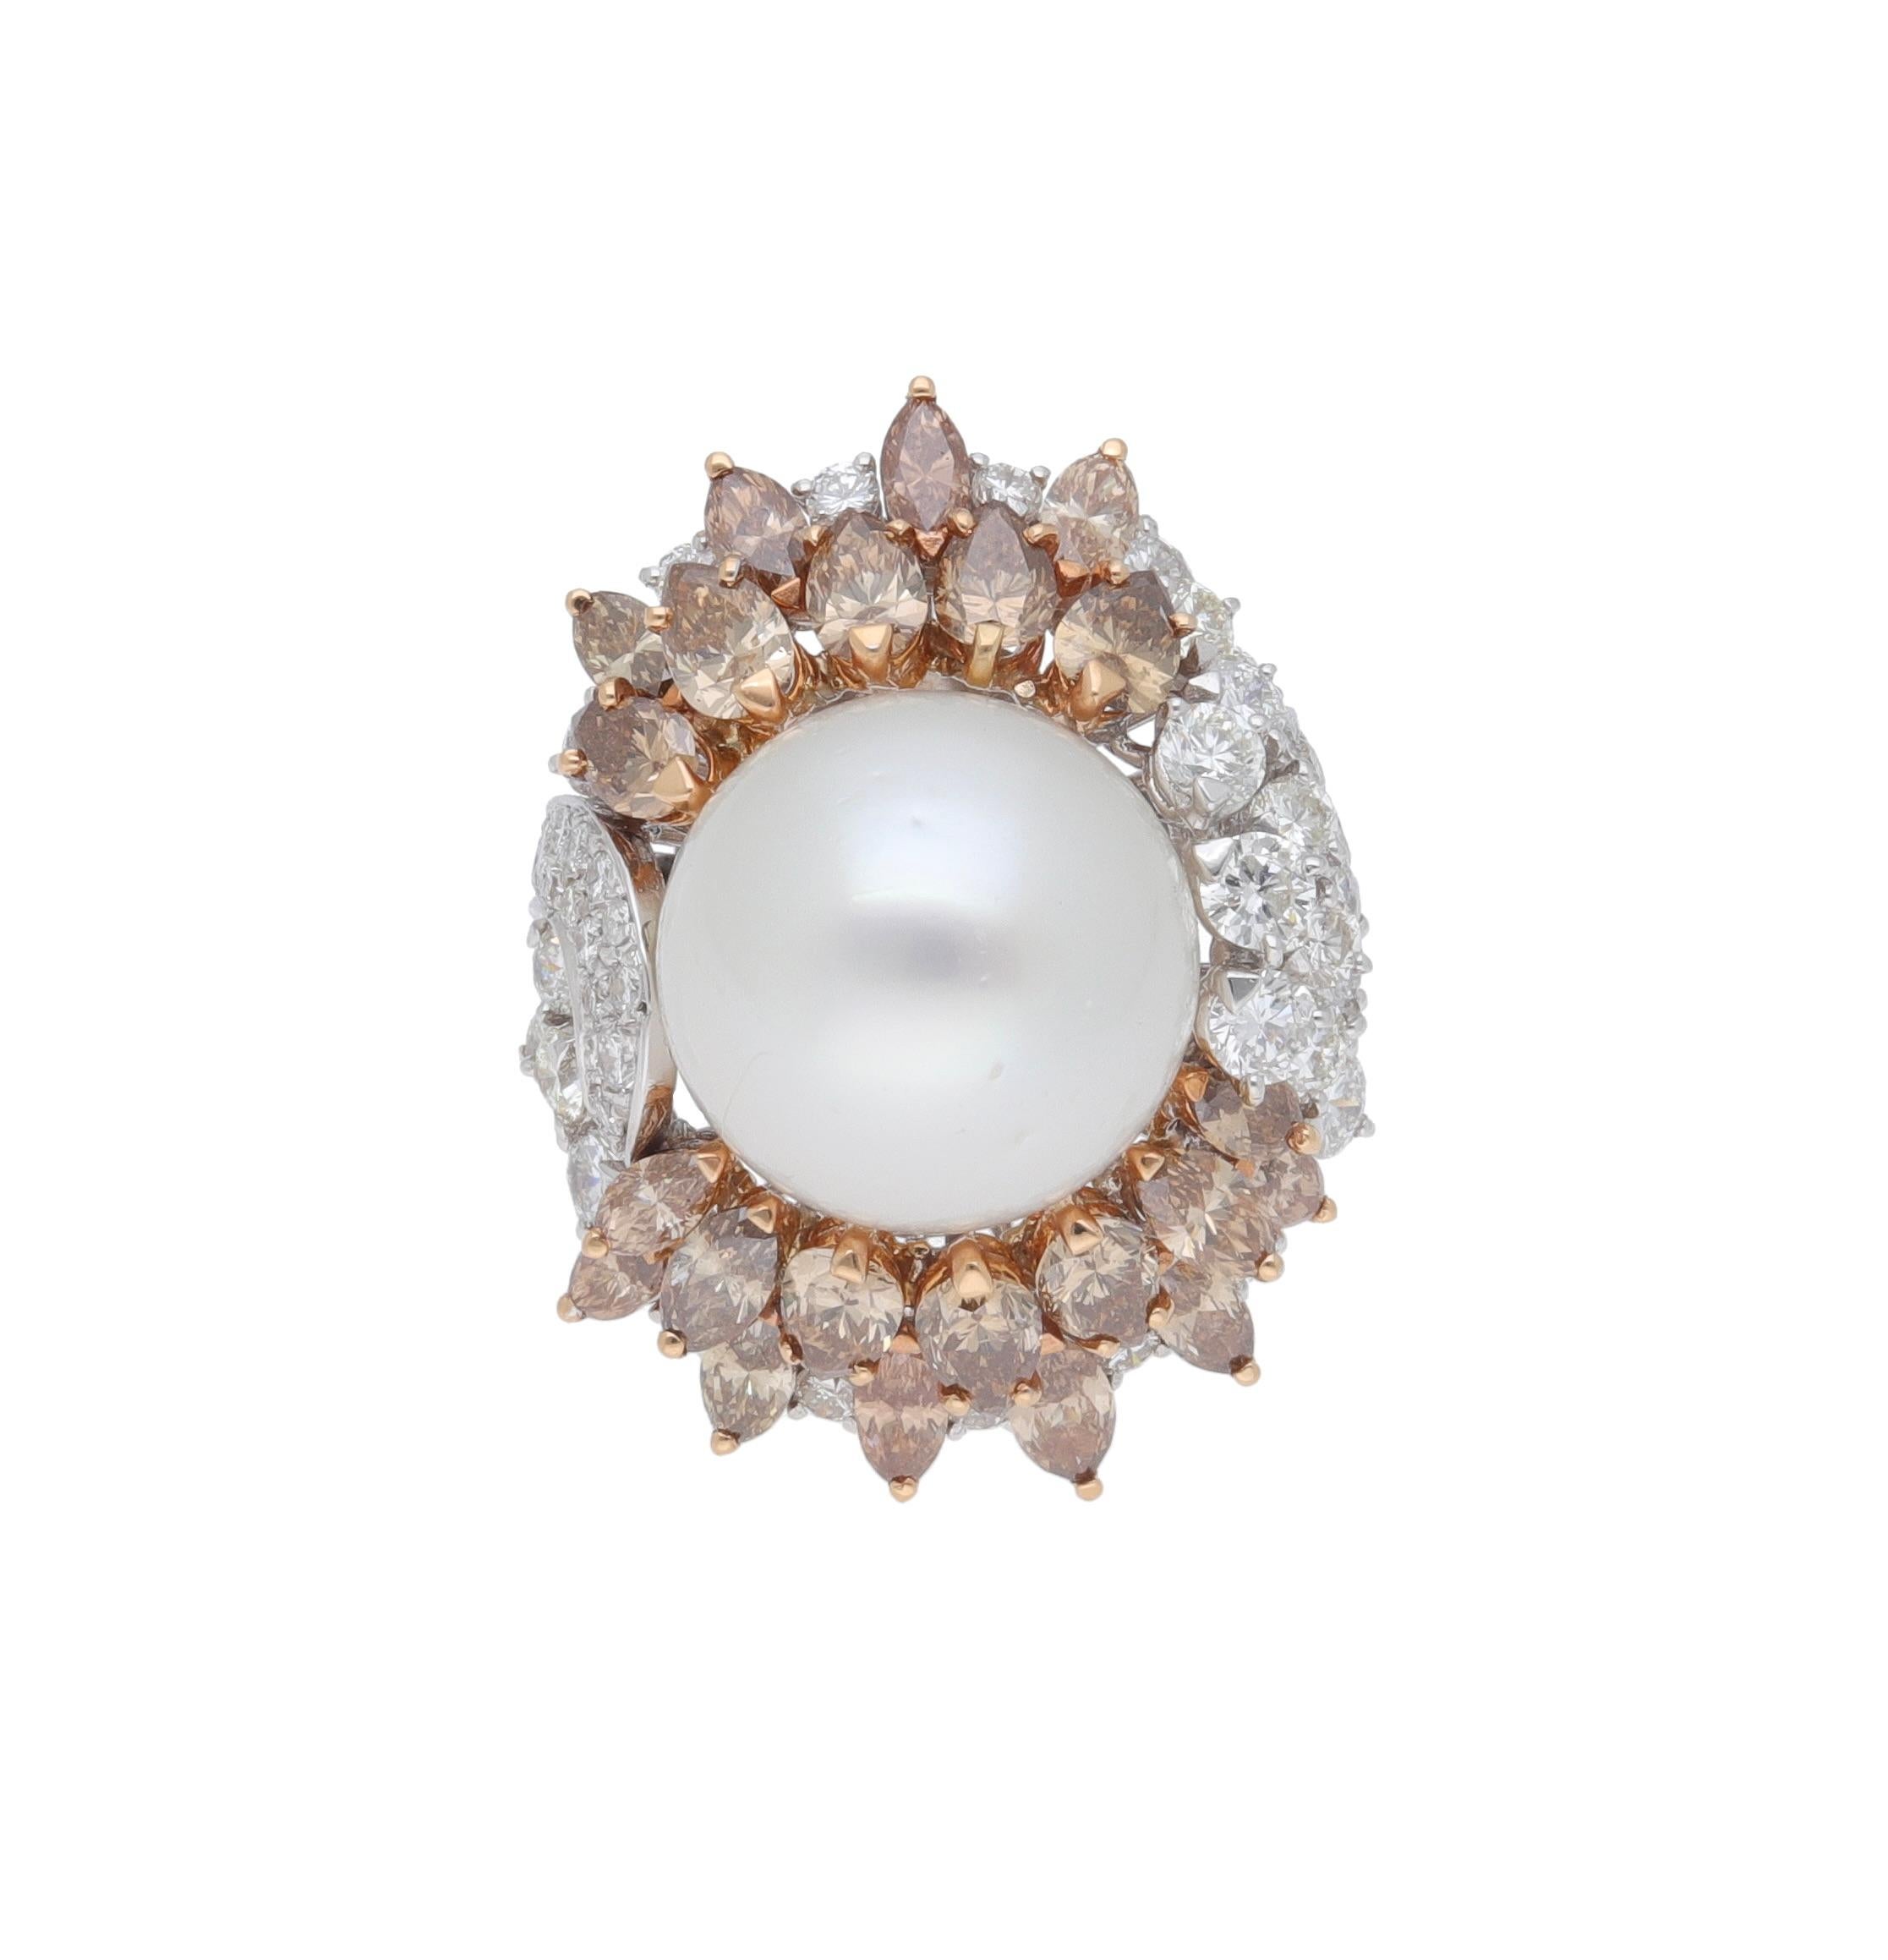 Handcrafted ring made in Italy of 18 kt. white gold with brilliant-cut diamonds, brown navette-cut diamonds, Australian pearl.
This ring is part of the Moon Fraleoni Collection. 
Unique piece.
The 20 mm. Australian pearl is sandwiched between the